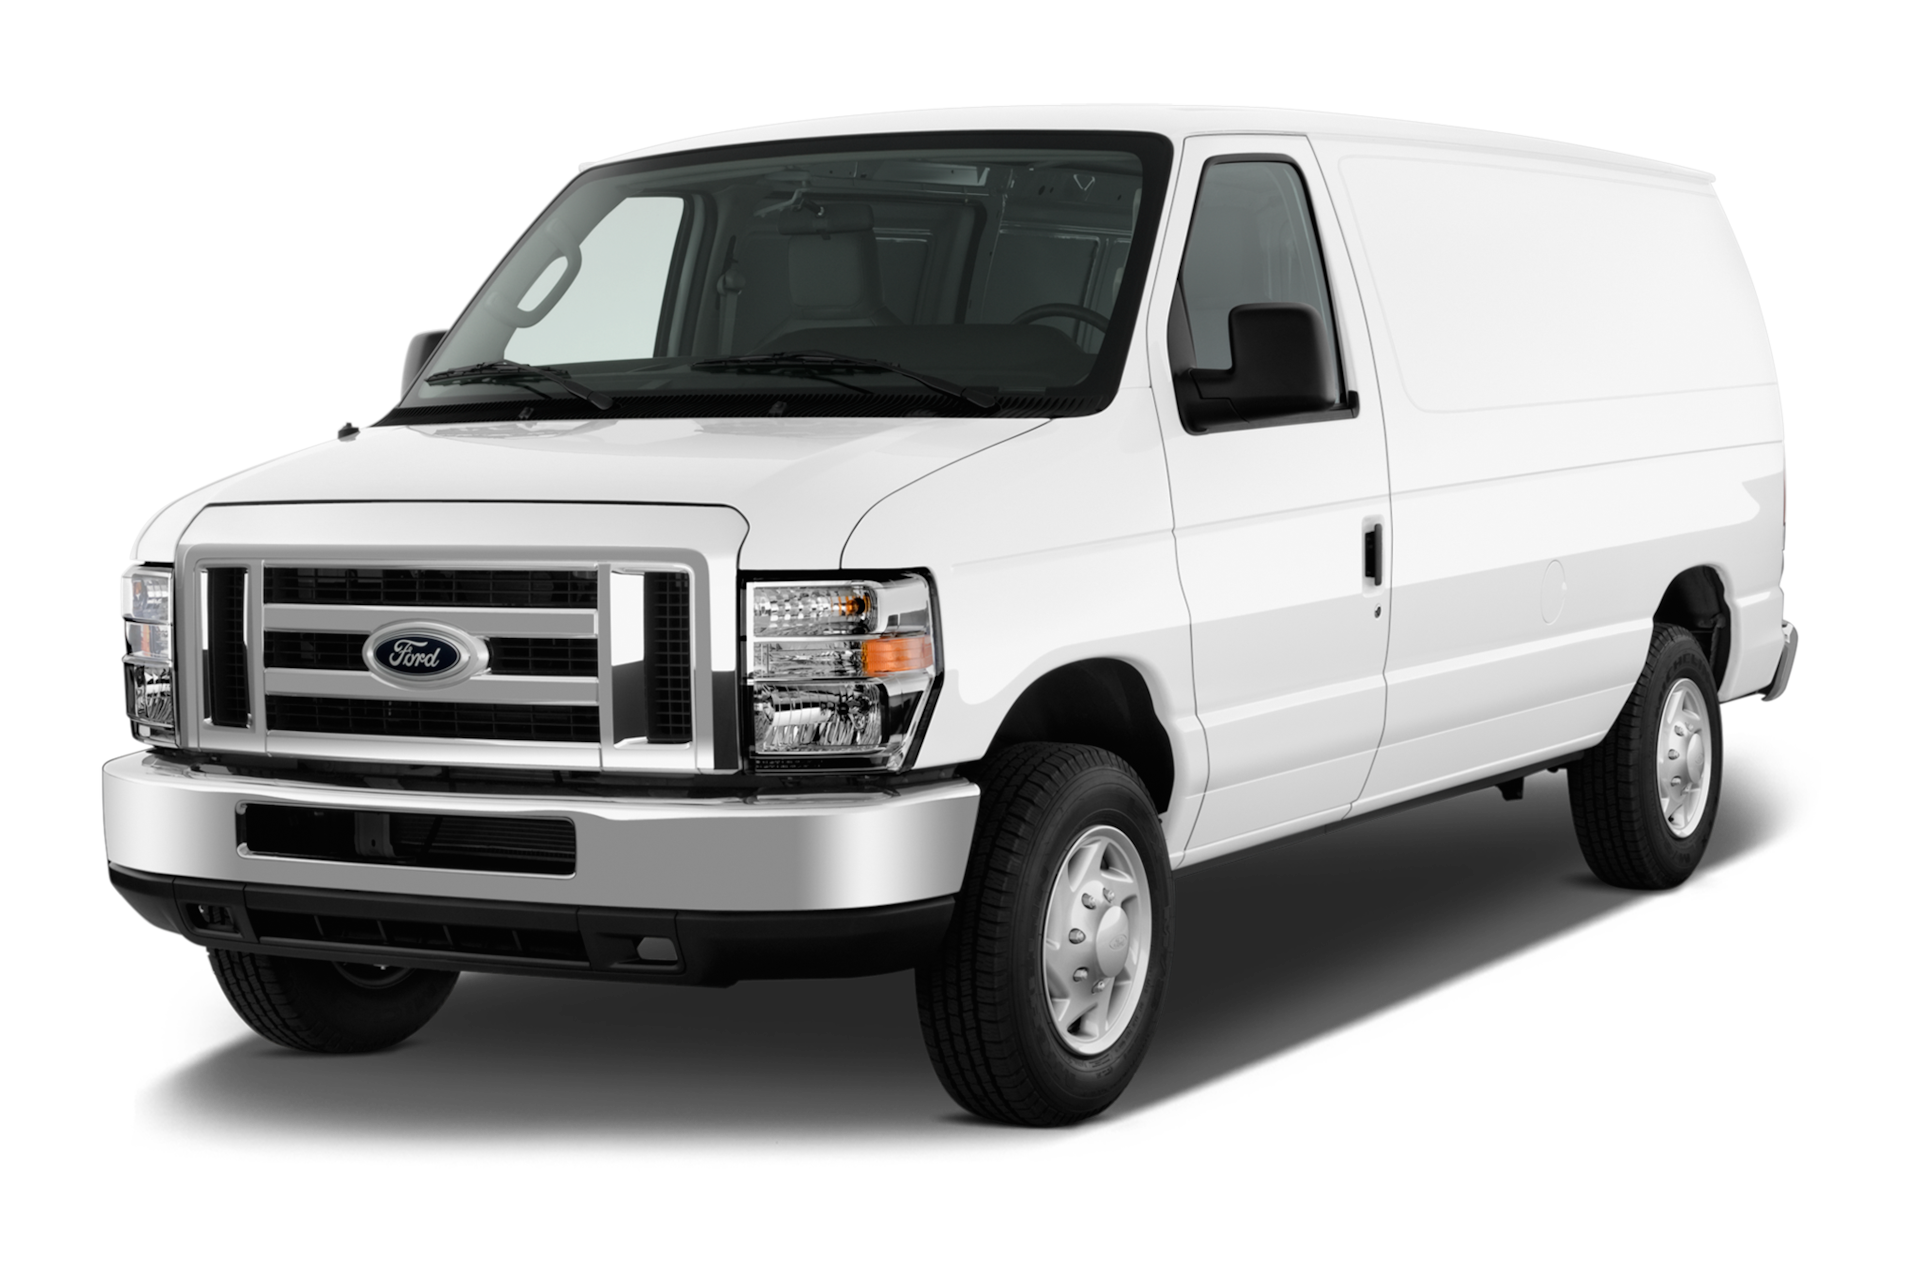 2013 Ford E-250 Prices, Reviews, and Photos - MotorTrend